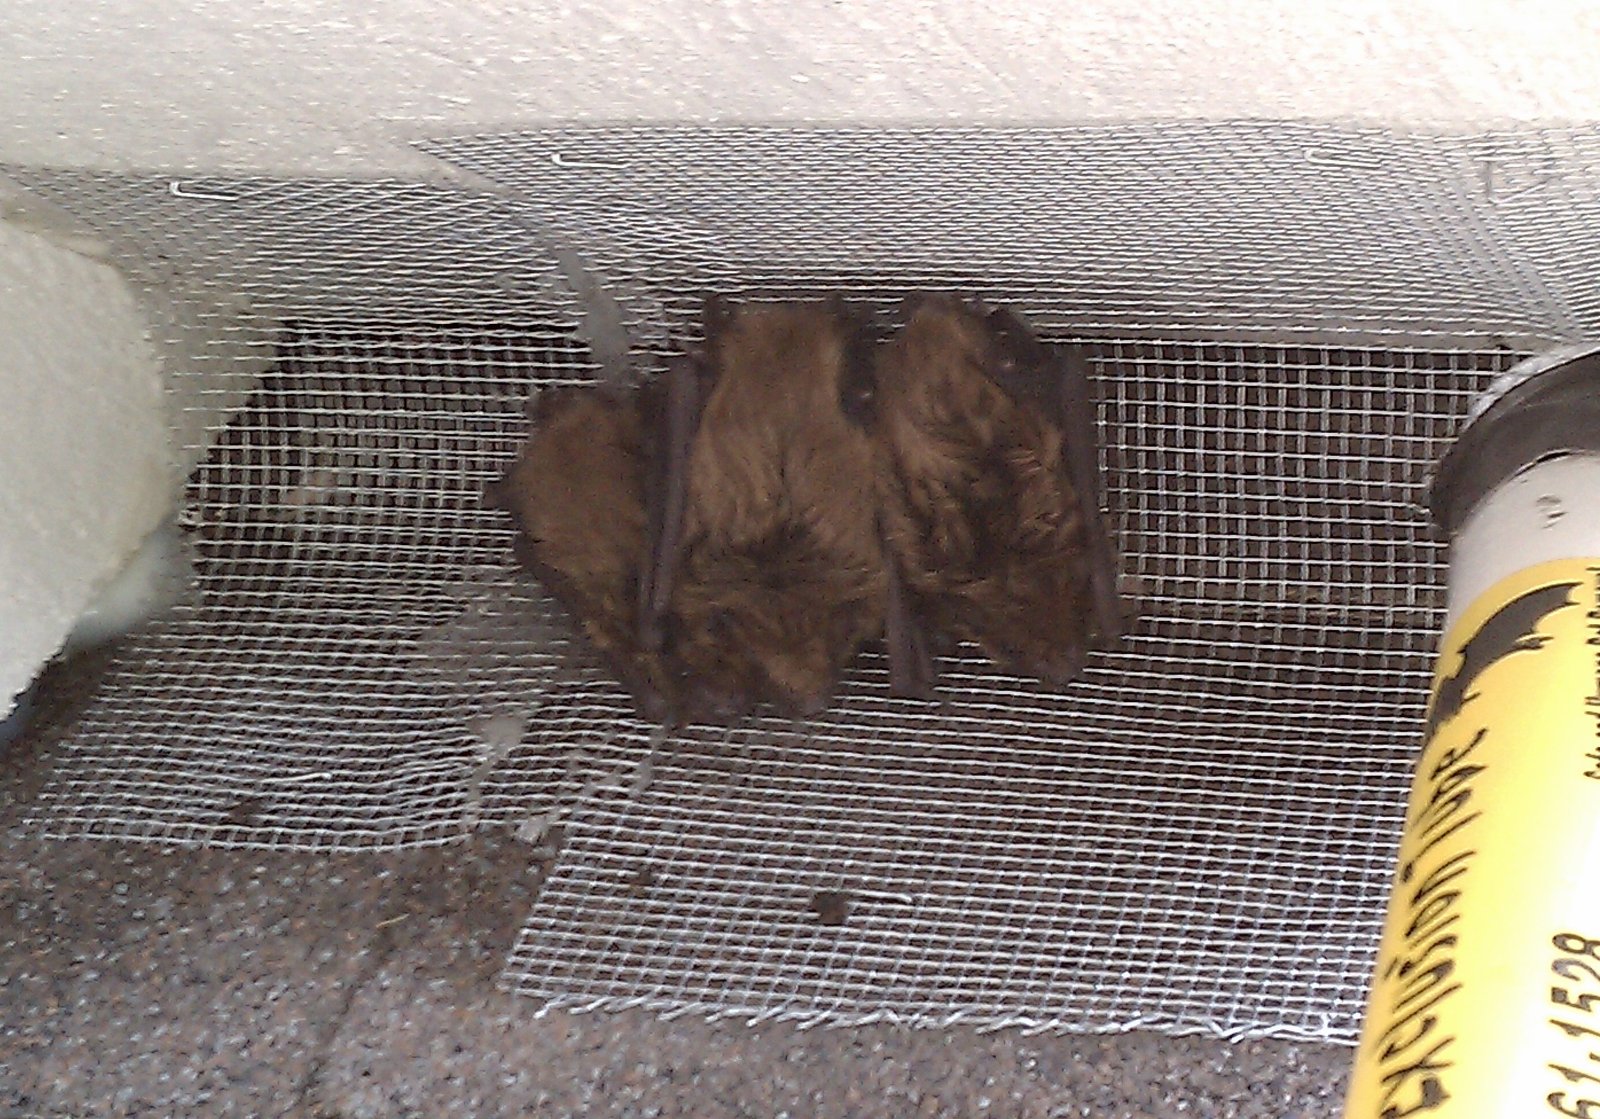 Image of bats blocked by exclusion device